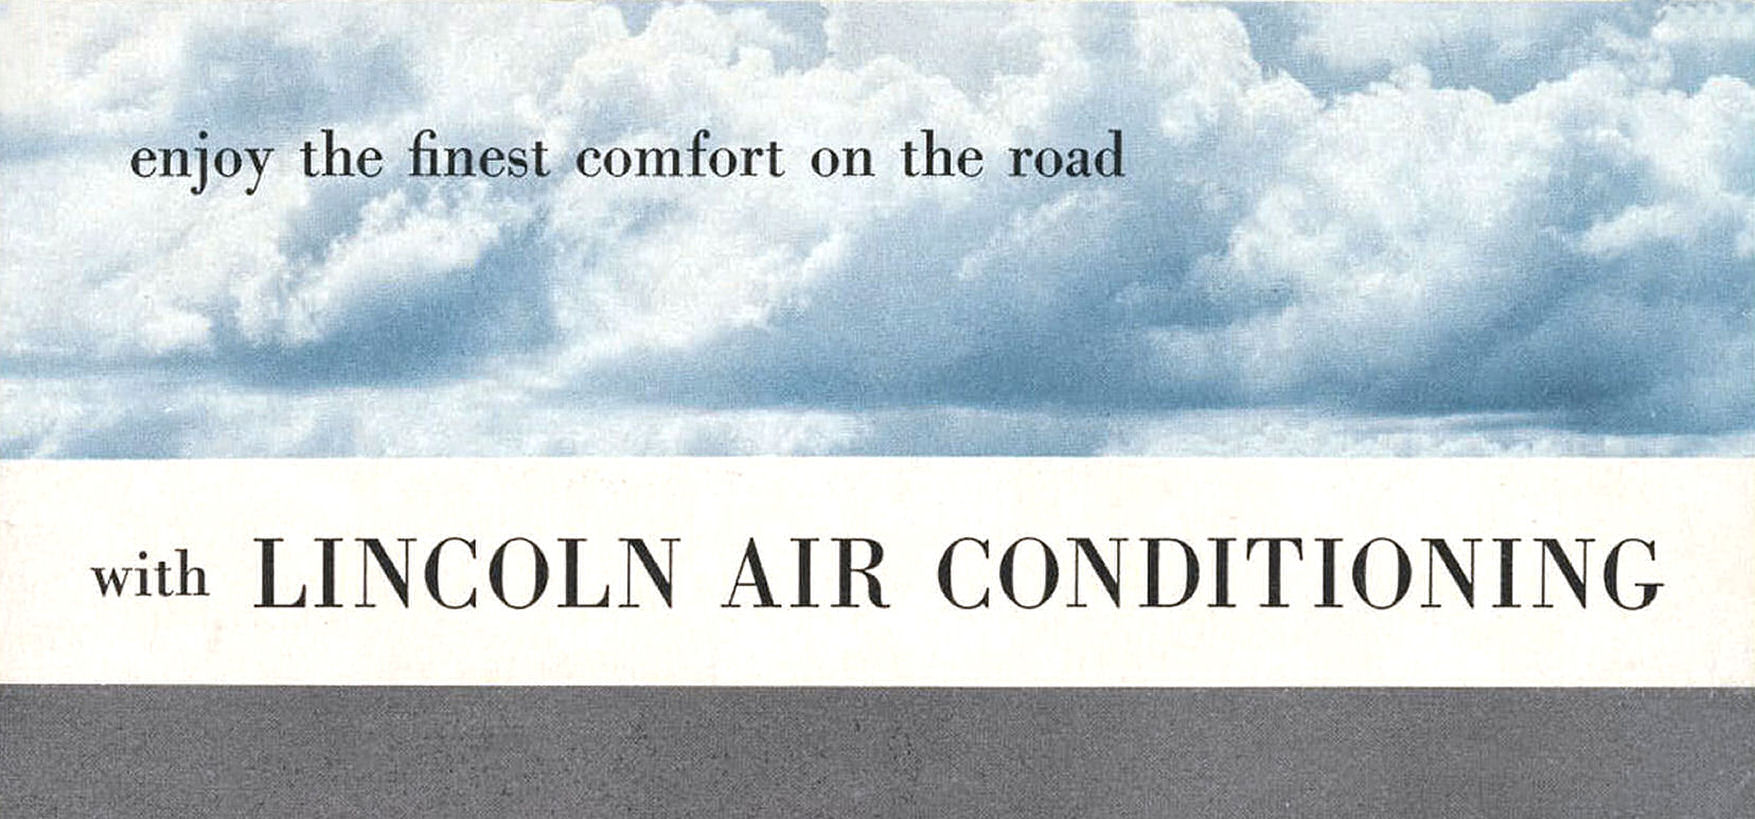 1954_Lincoln_Air_Conditioning-01